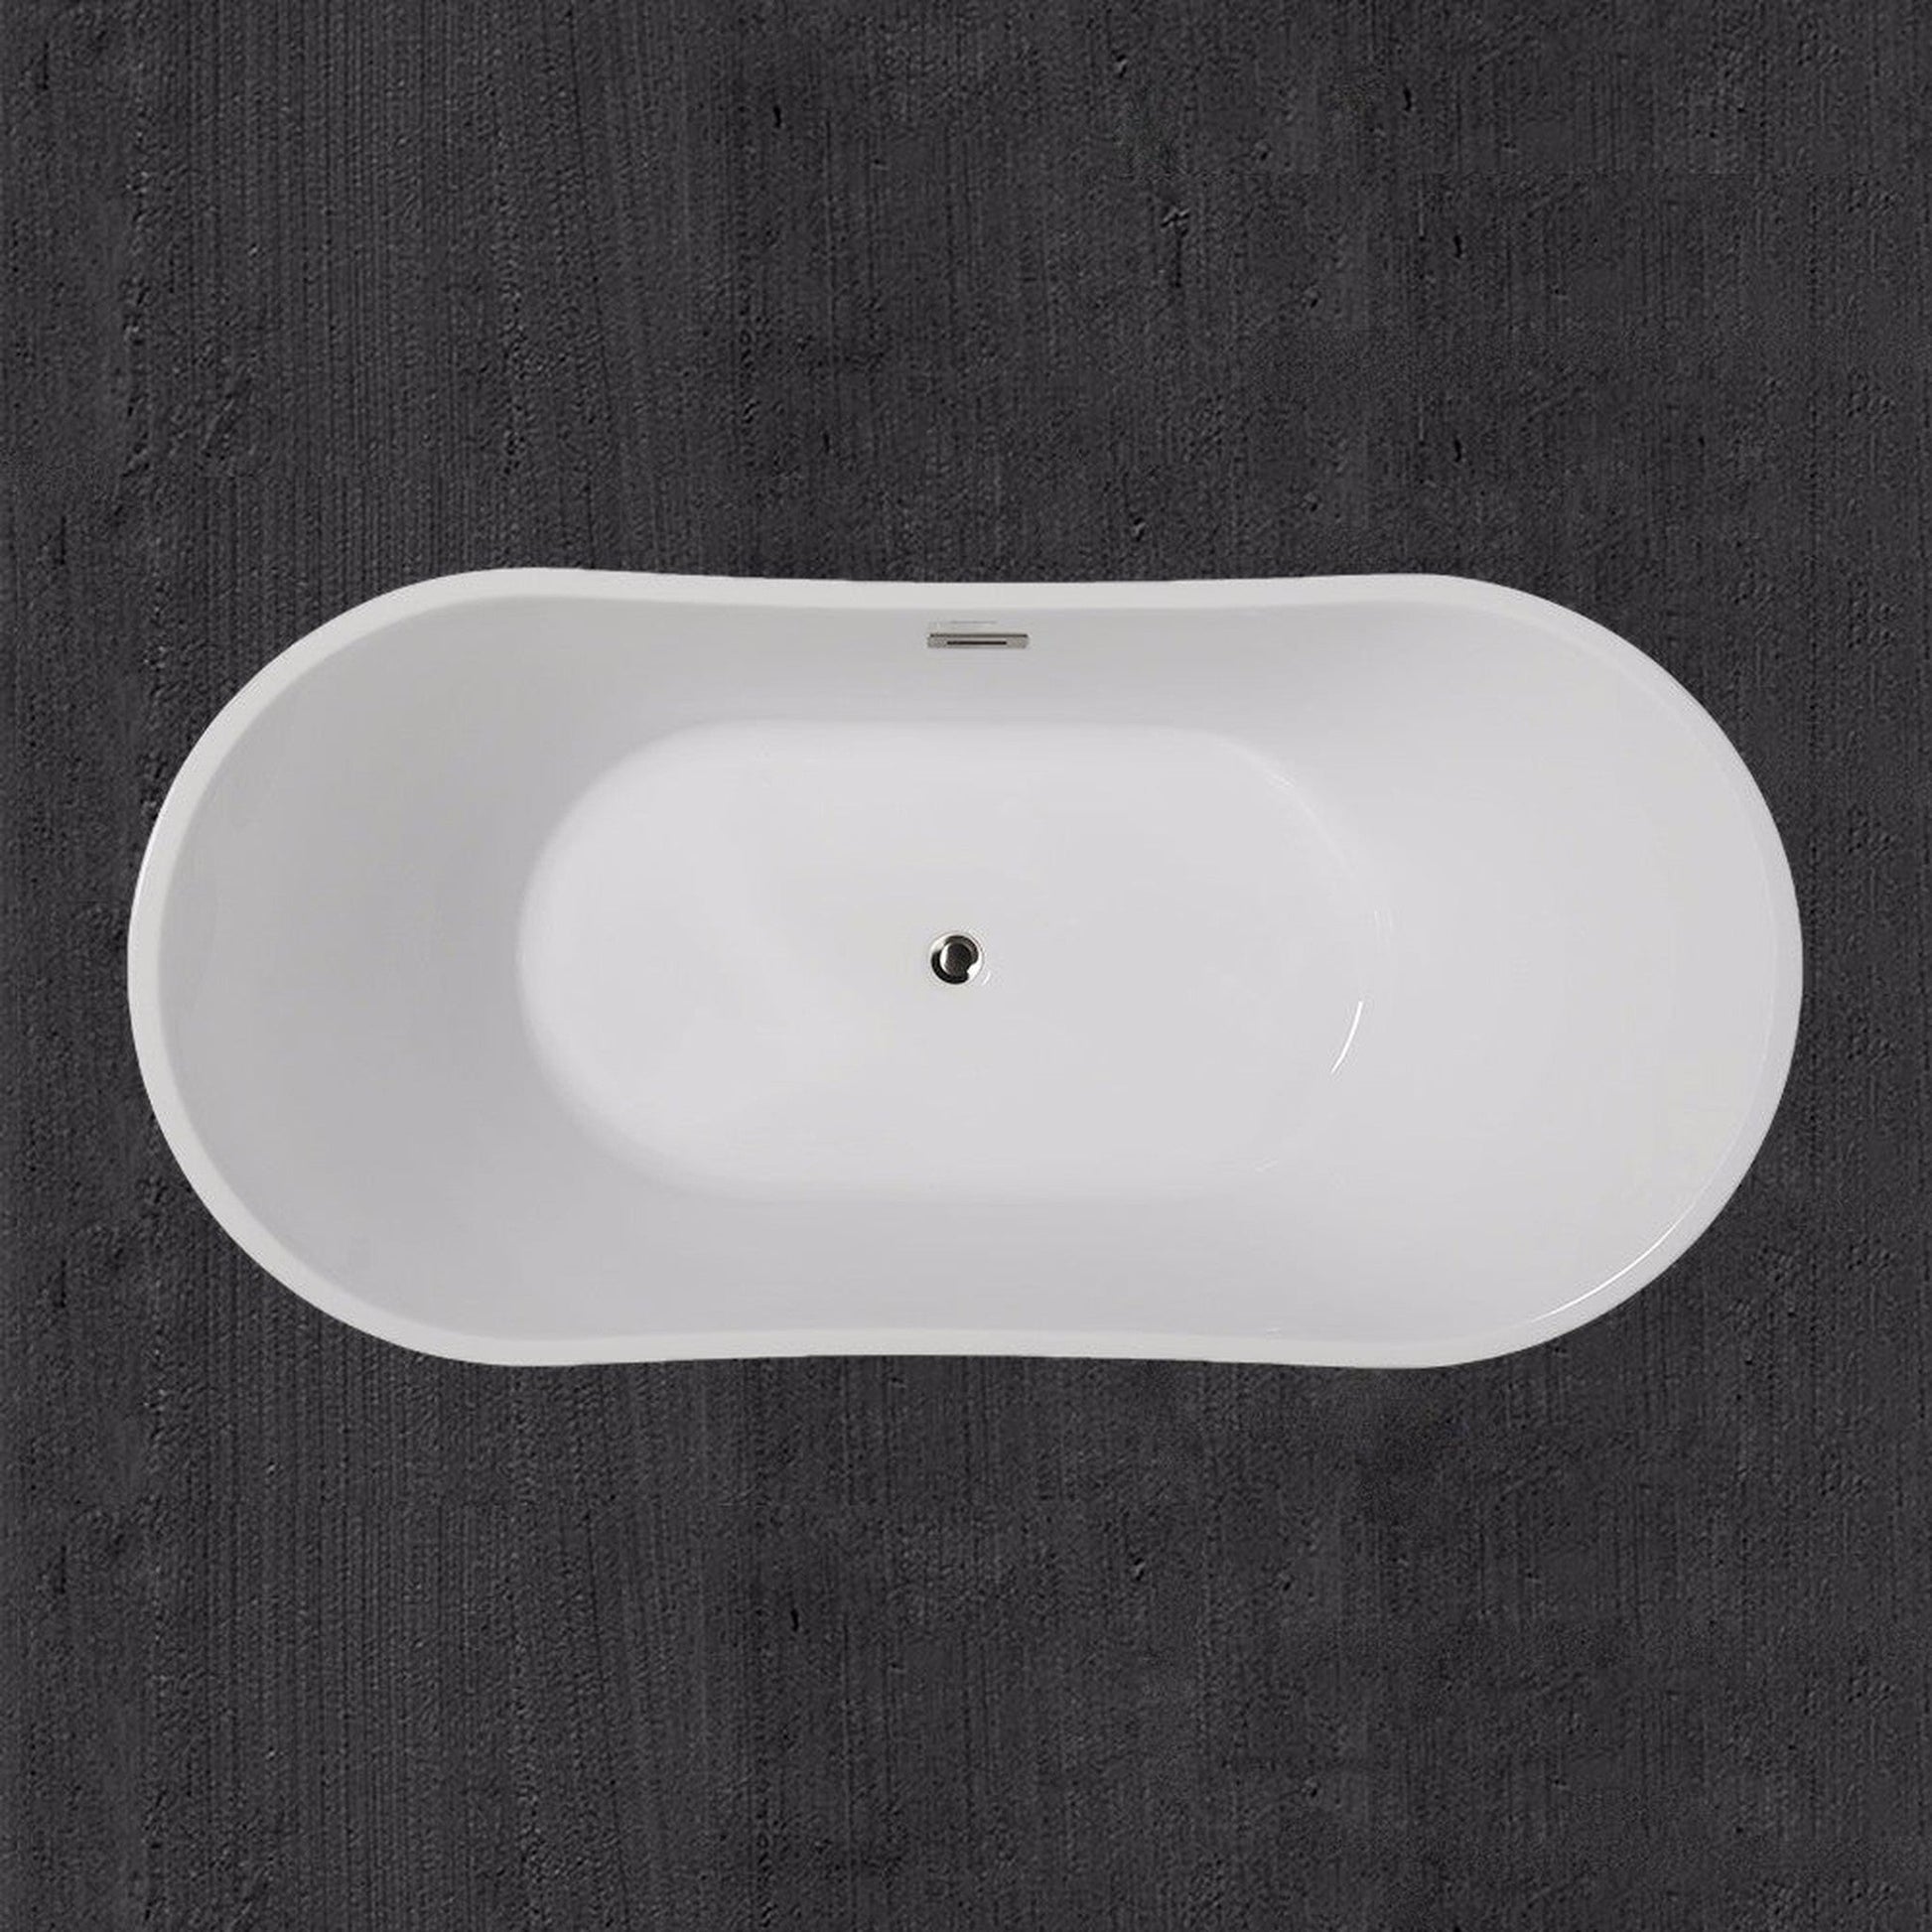 WoodBridge B0010 67" White Acrylic Freestanding Contemporary Soaking Bathtub With Brushed Nickel Drain, Overflow, F0070BNSQ Tub Filler and Caddy Tray